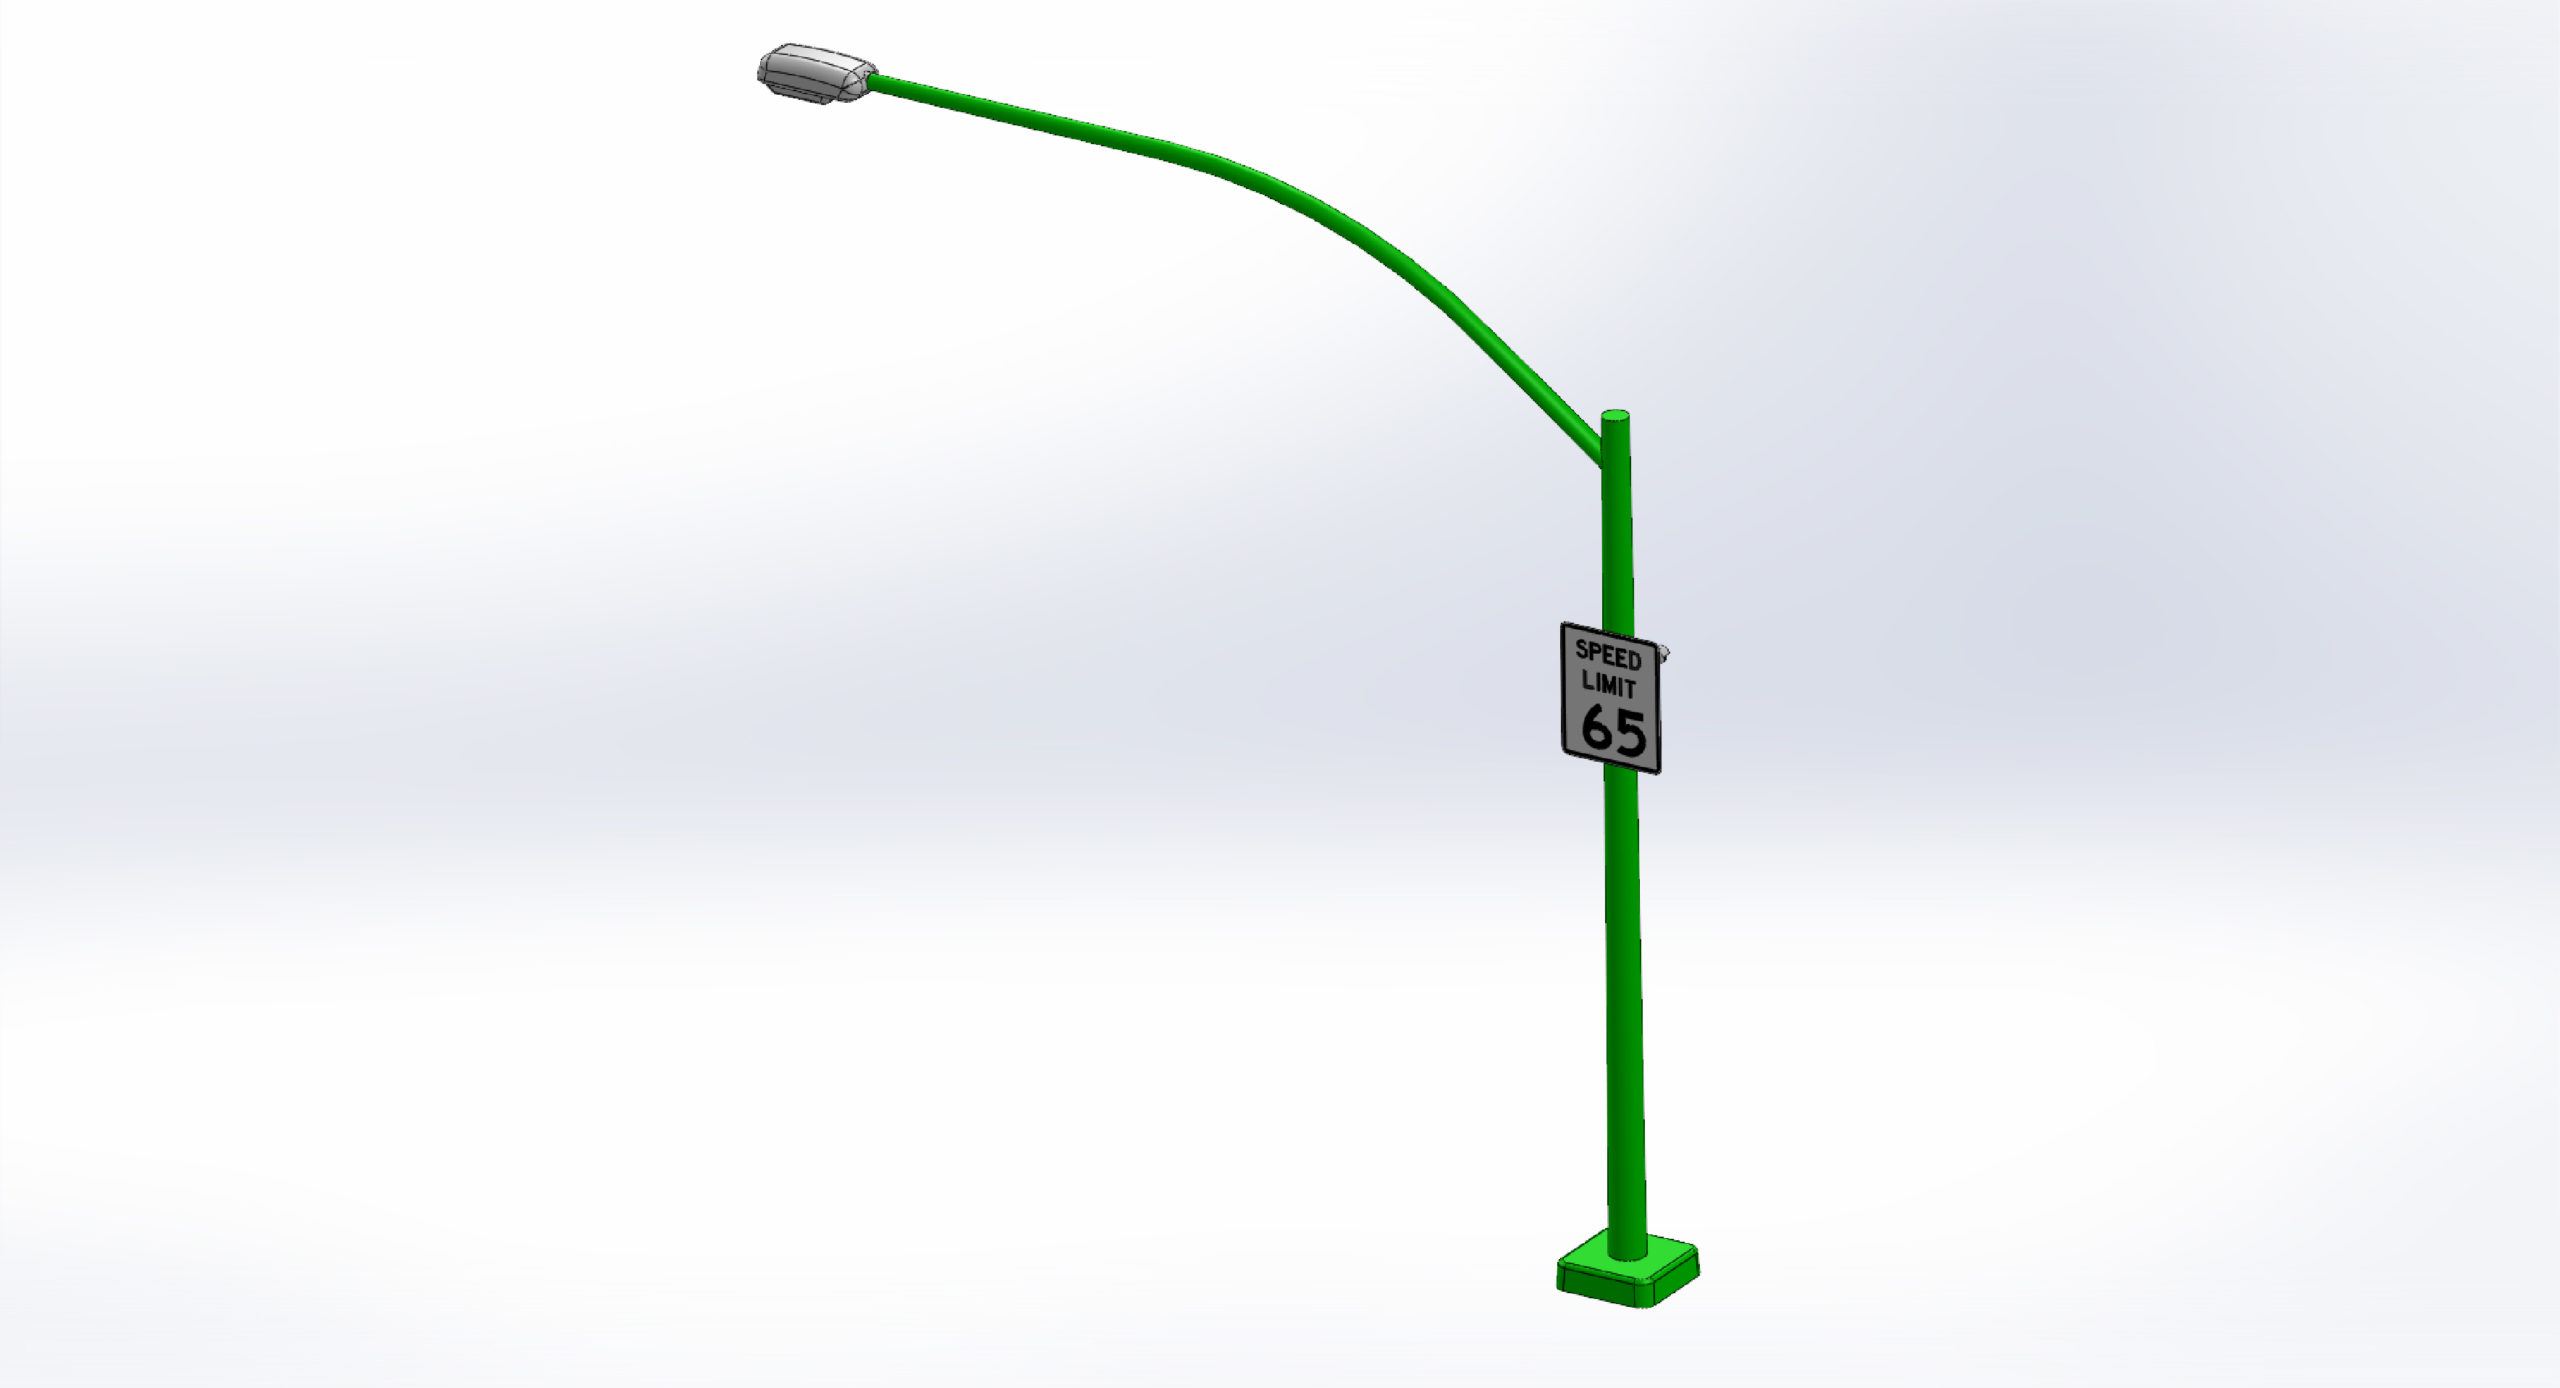 VCalm® Rekor Edge Max Mounted on Existing Pole